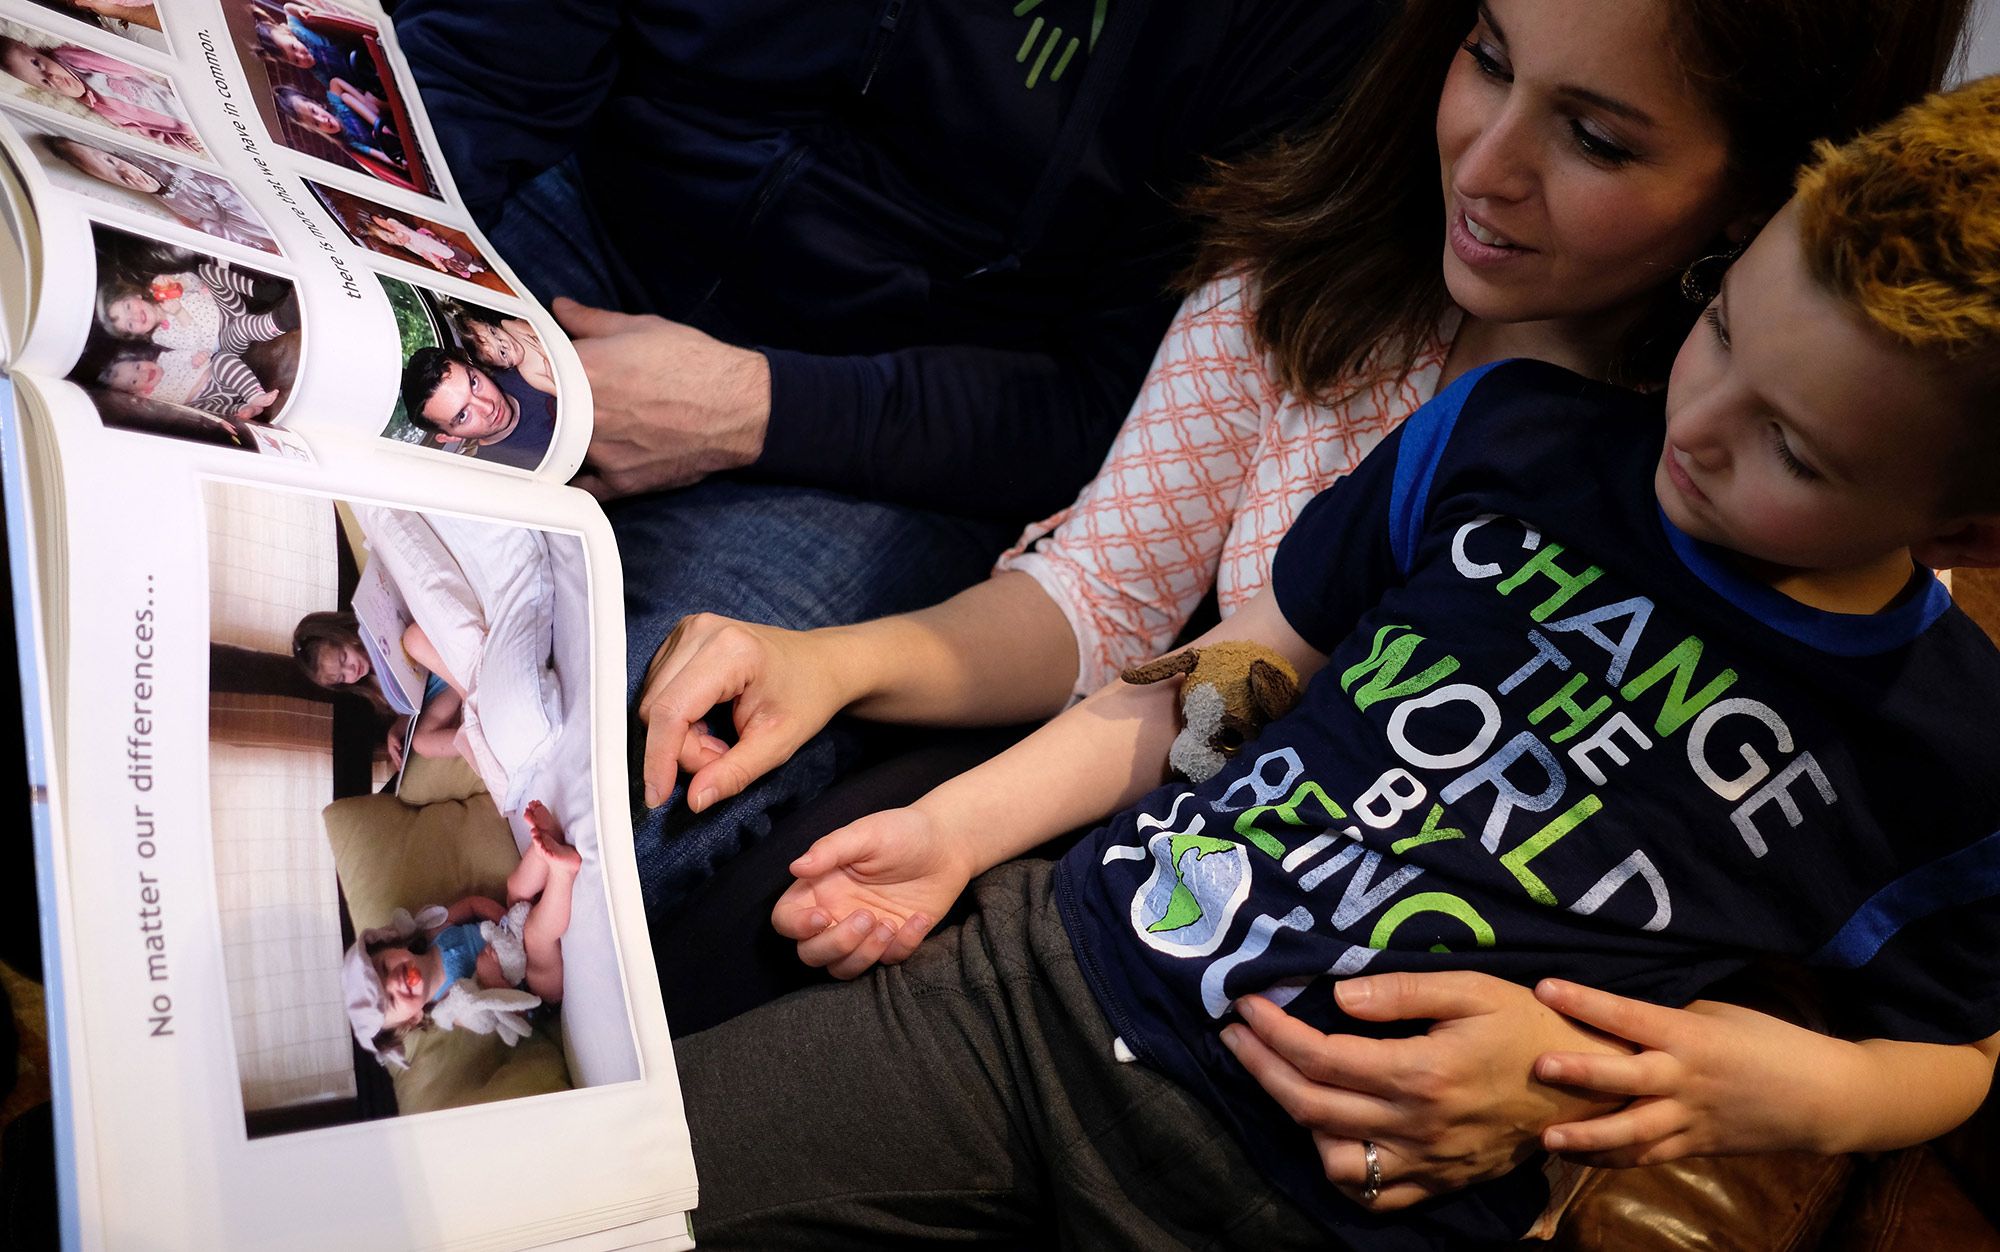 Jacob Lemay, aged 7, with his parents, looking through family photos from before his transition, Massachusetts, 2017. Photo by Jewel Samad AFP/Getty J